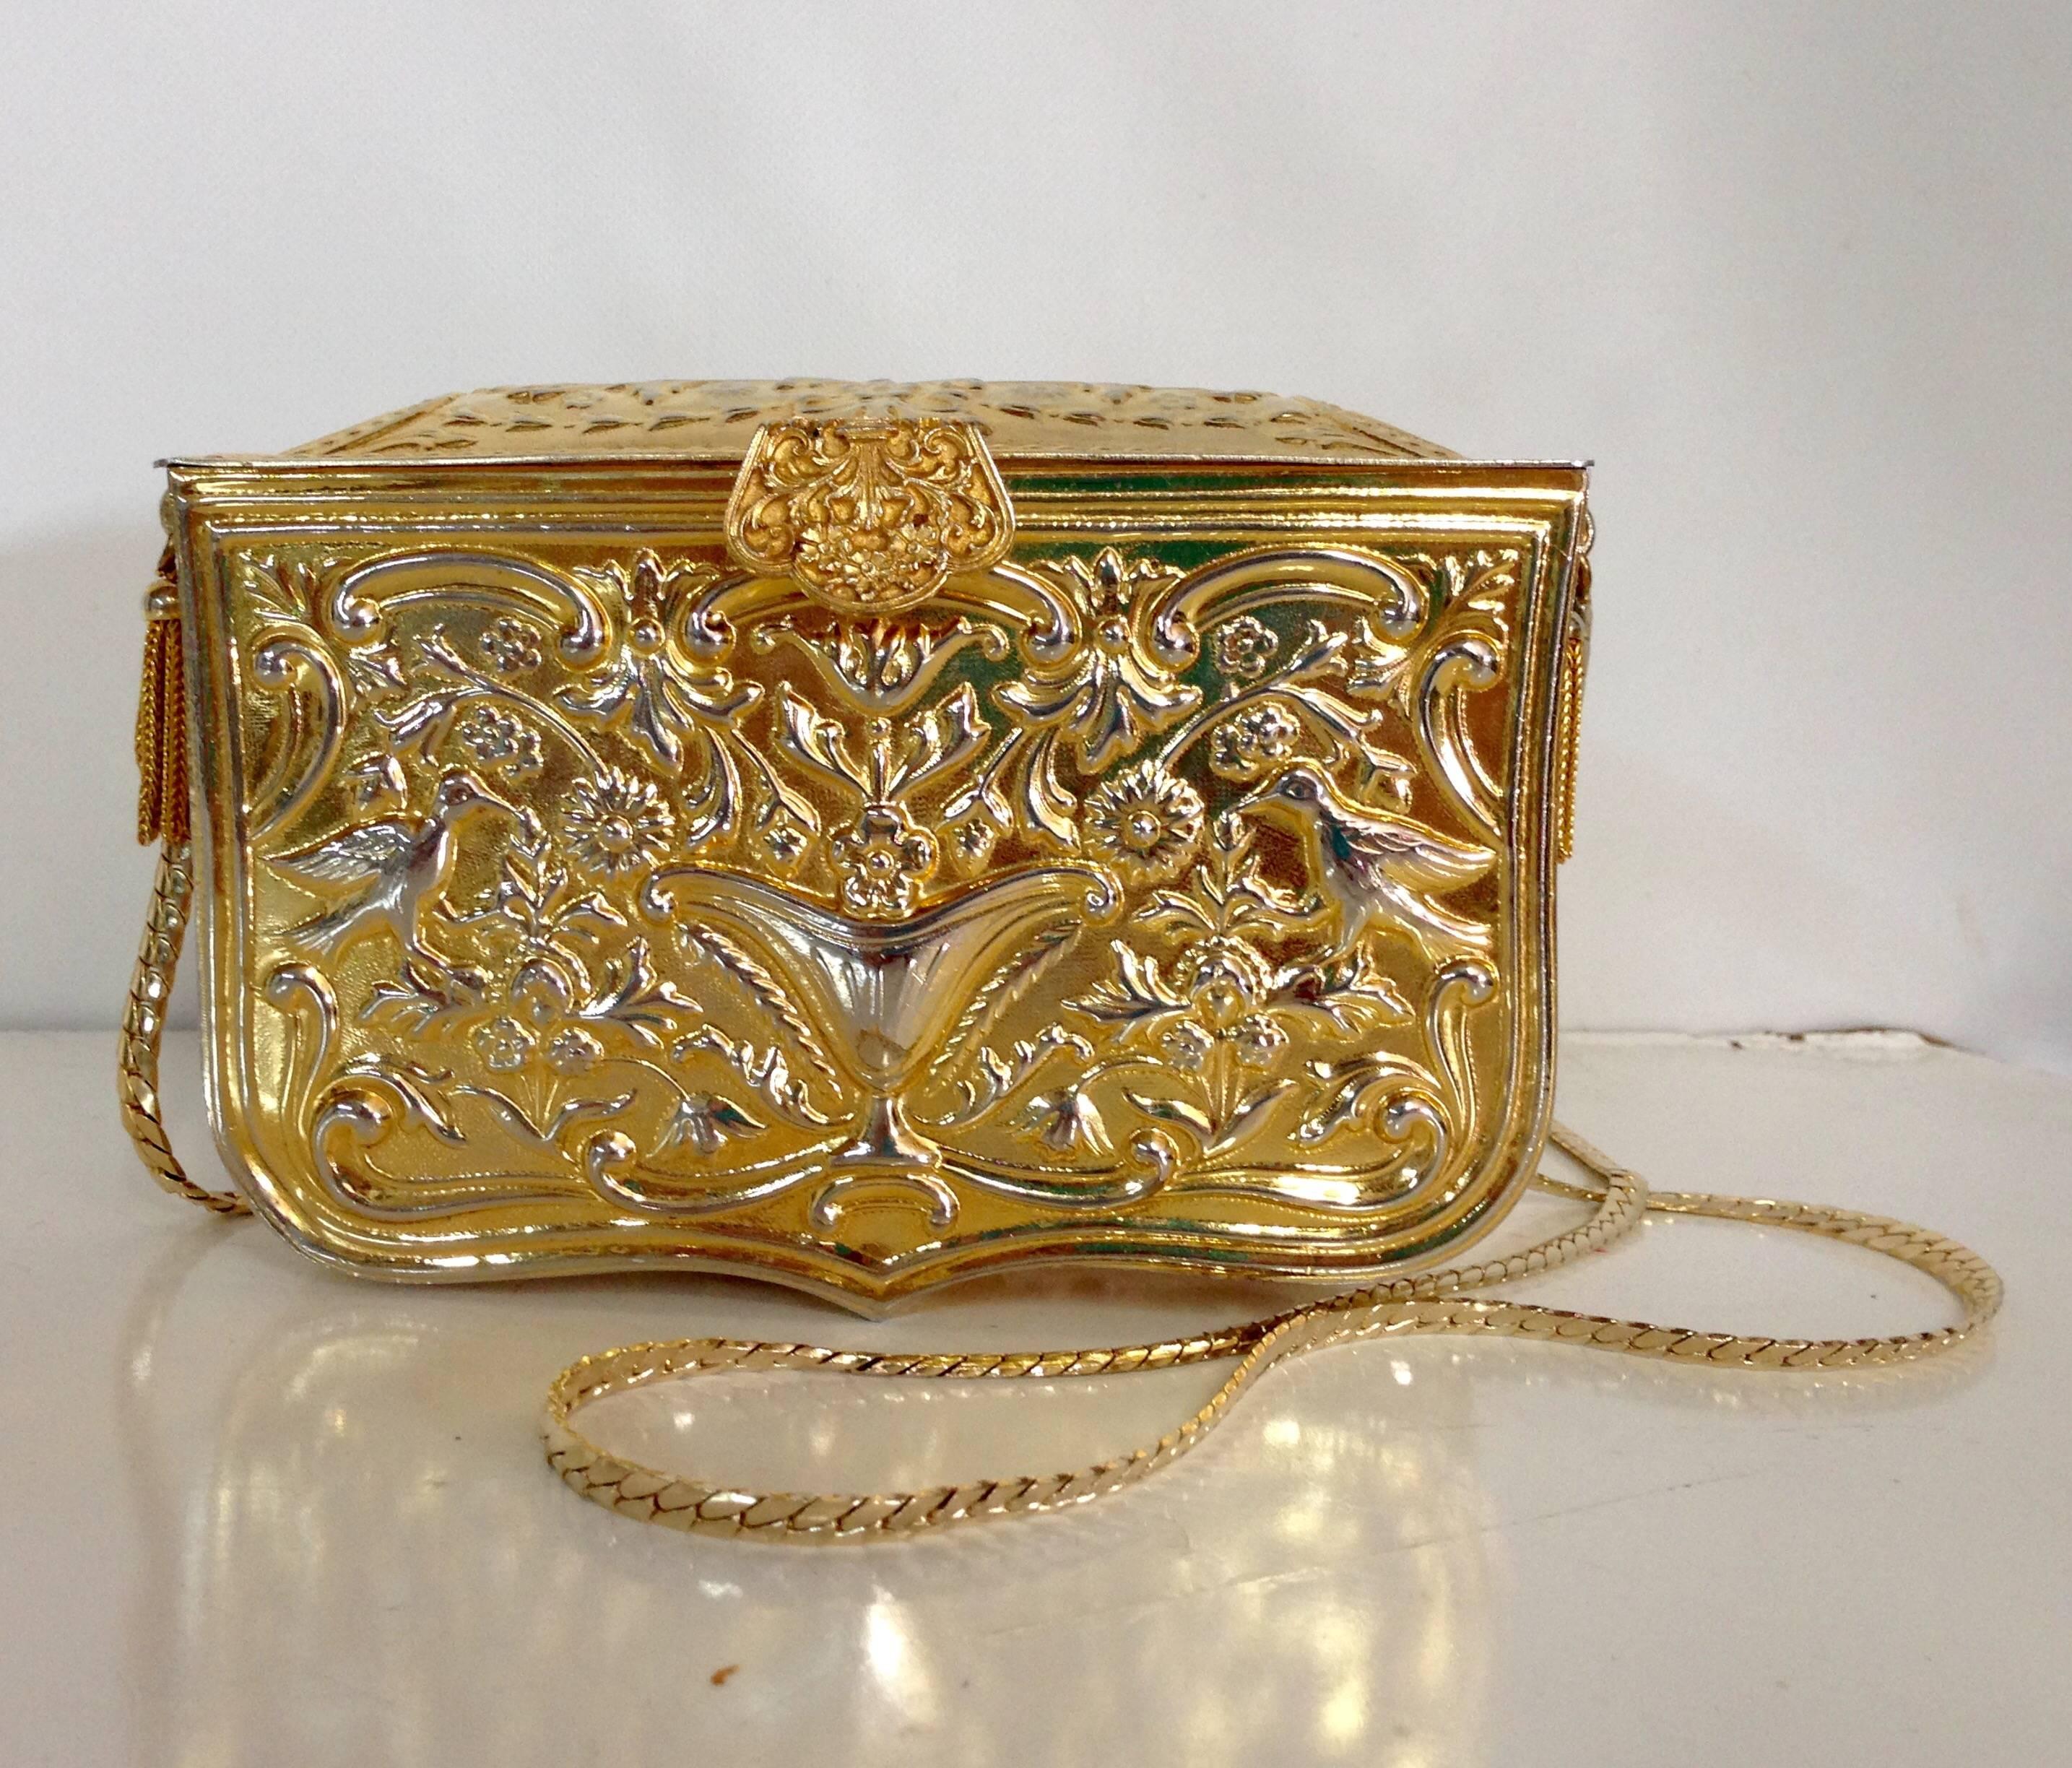 Rare 1960s Judith Leiber gold and silver two tone metal box handbag. Singed, Judith Leiber and made for Saks Fifth Avenue. Gold leather interior and 19